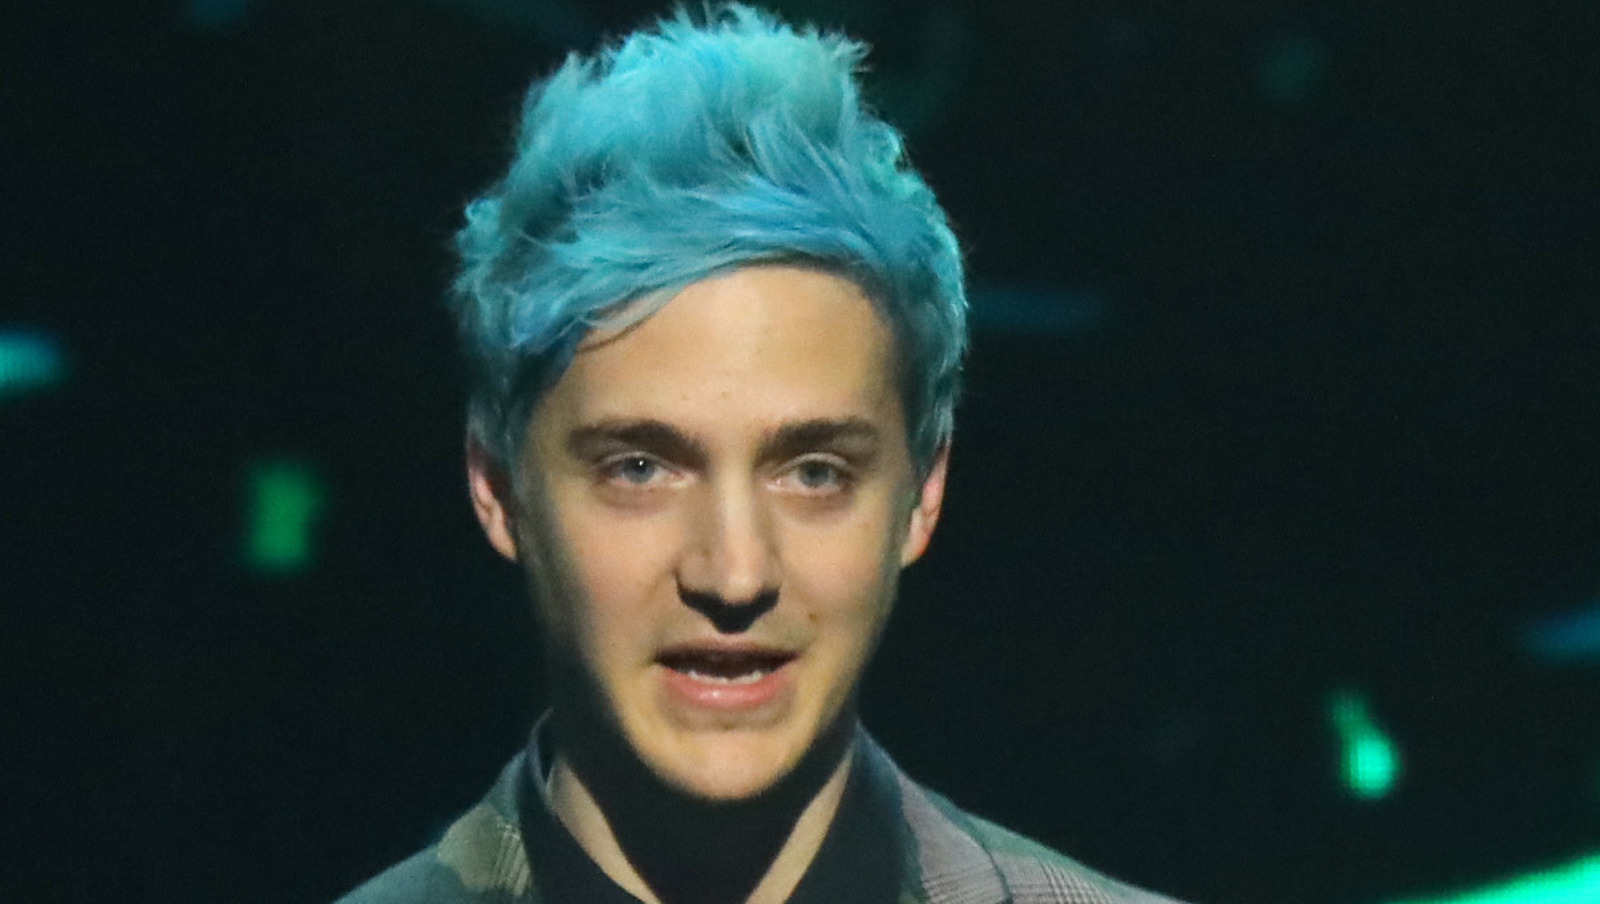 Ninja with Blue Hair Smiling for Camera - wide 8